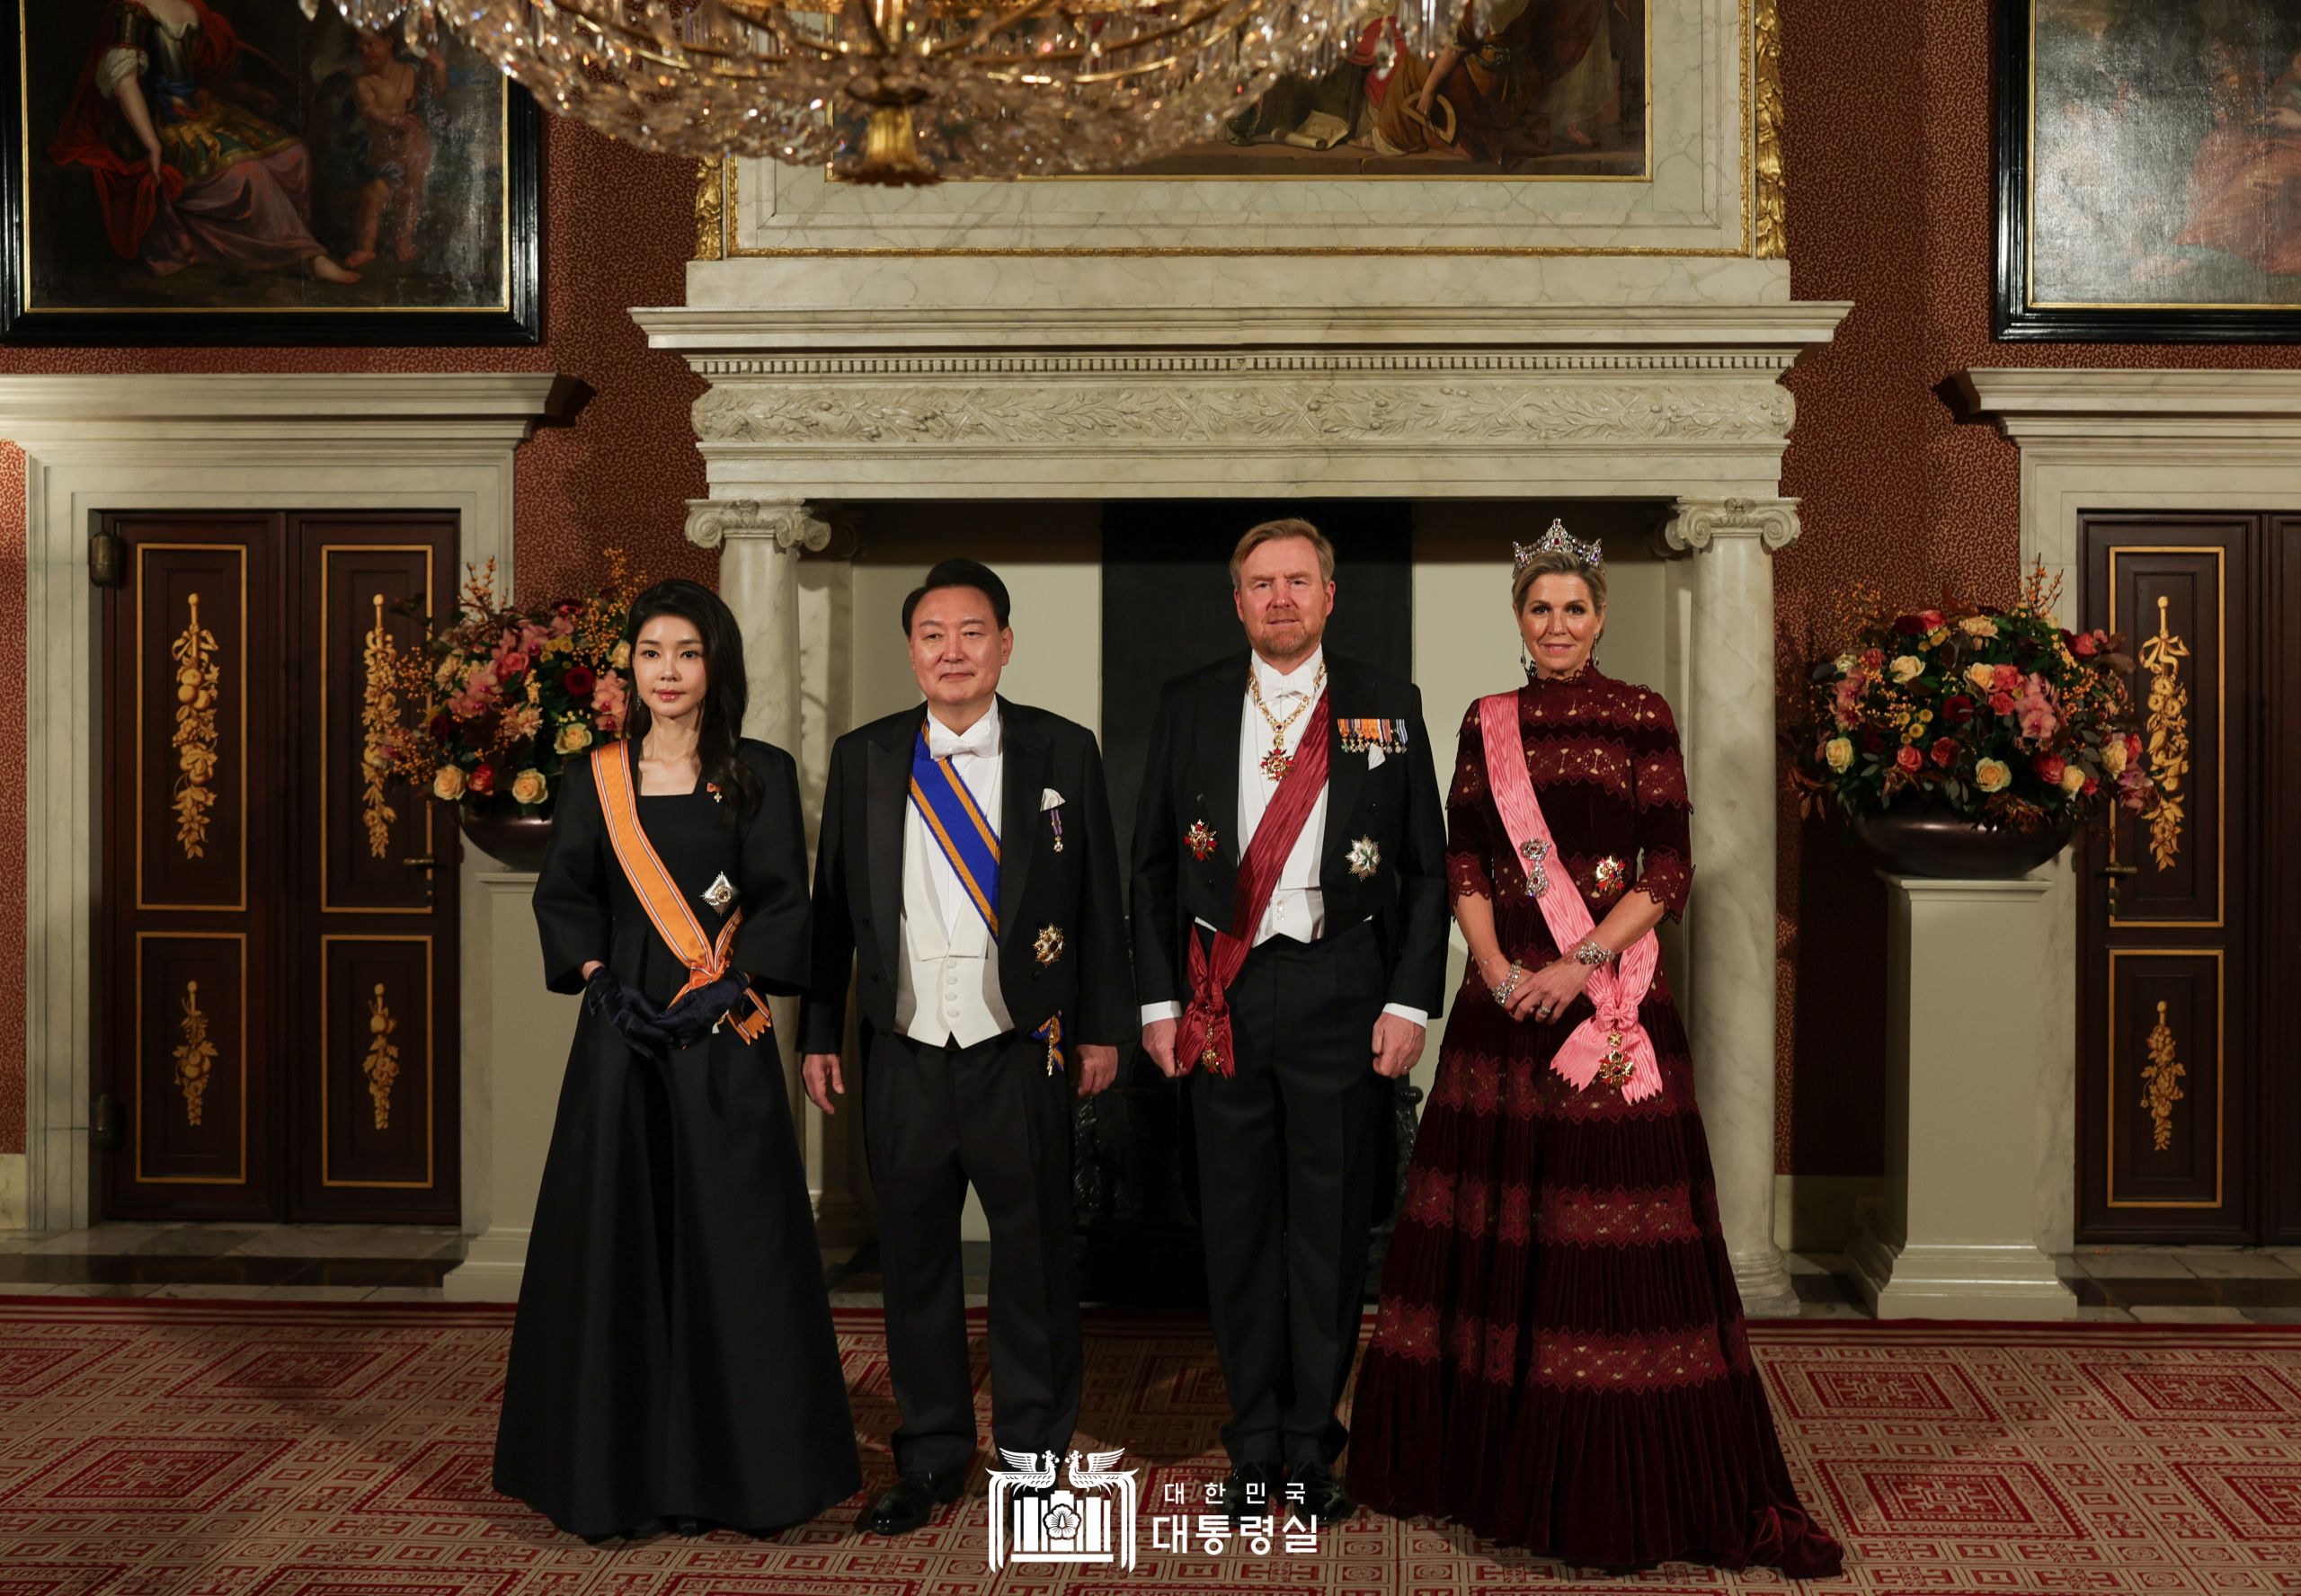 Remarks by President Yoon Suk Yeol at the State Banquet in the Kingdom of the Netherlands